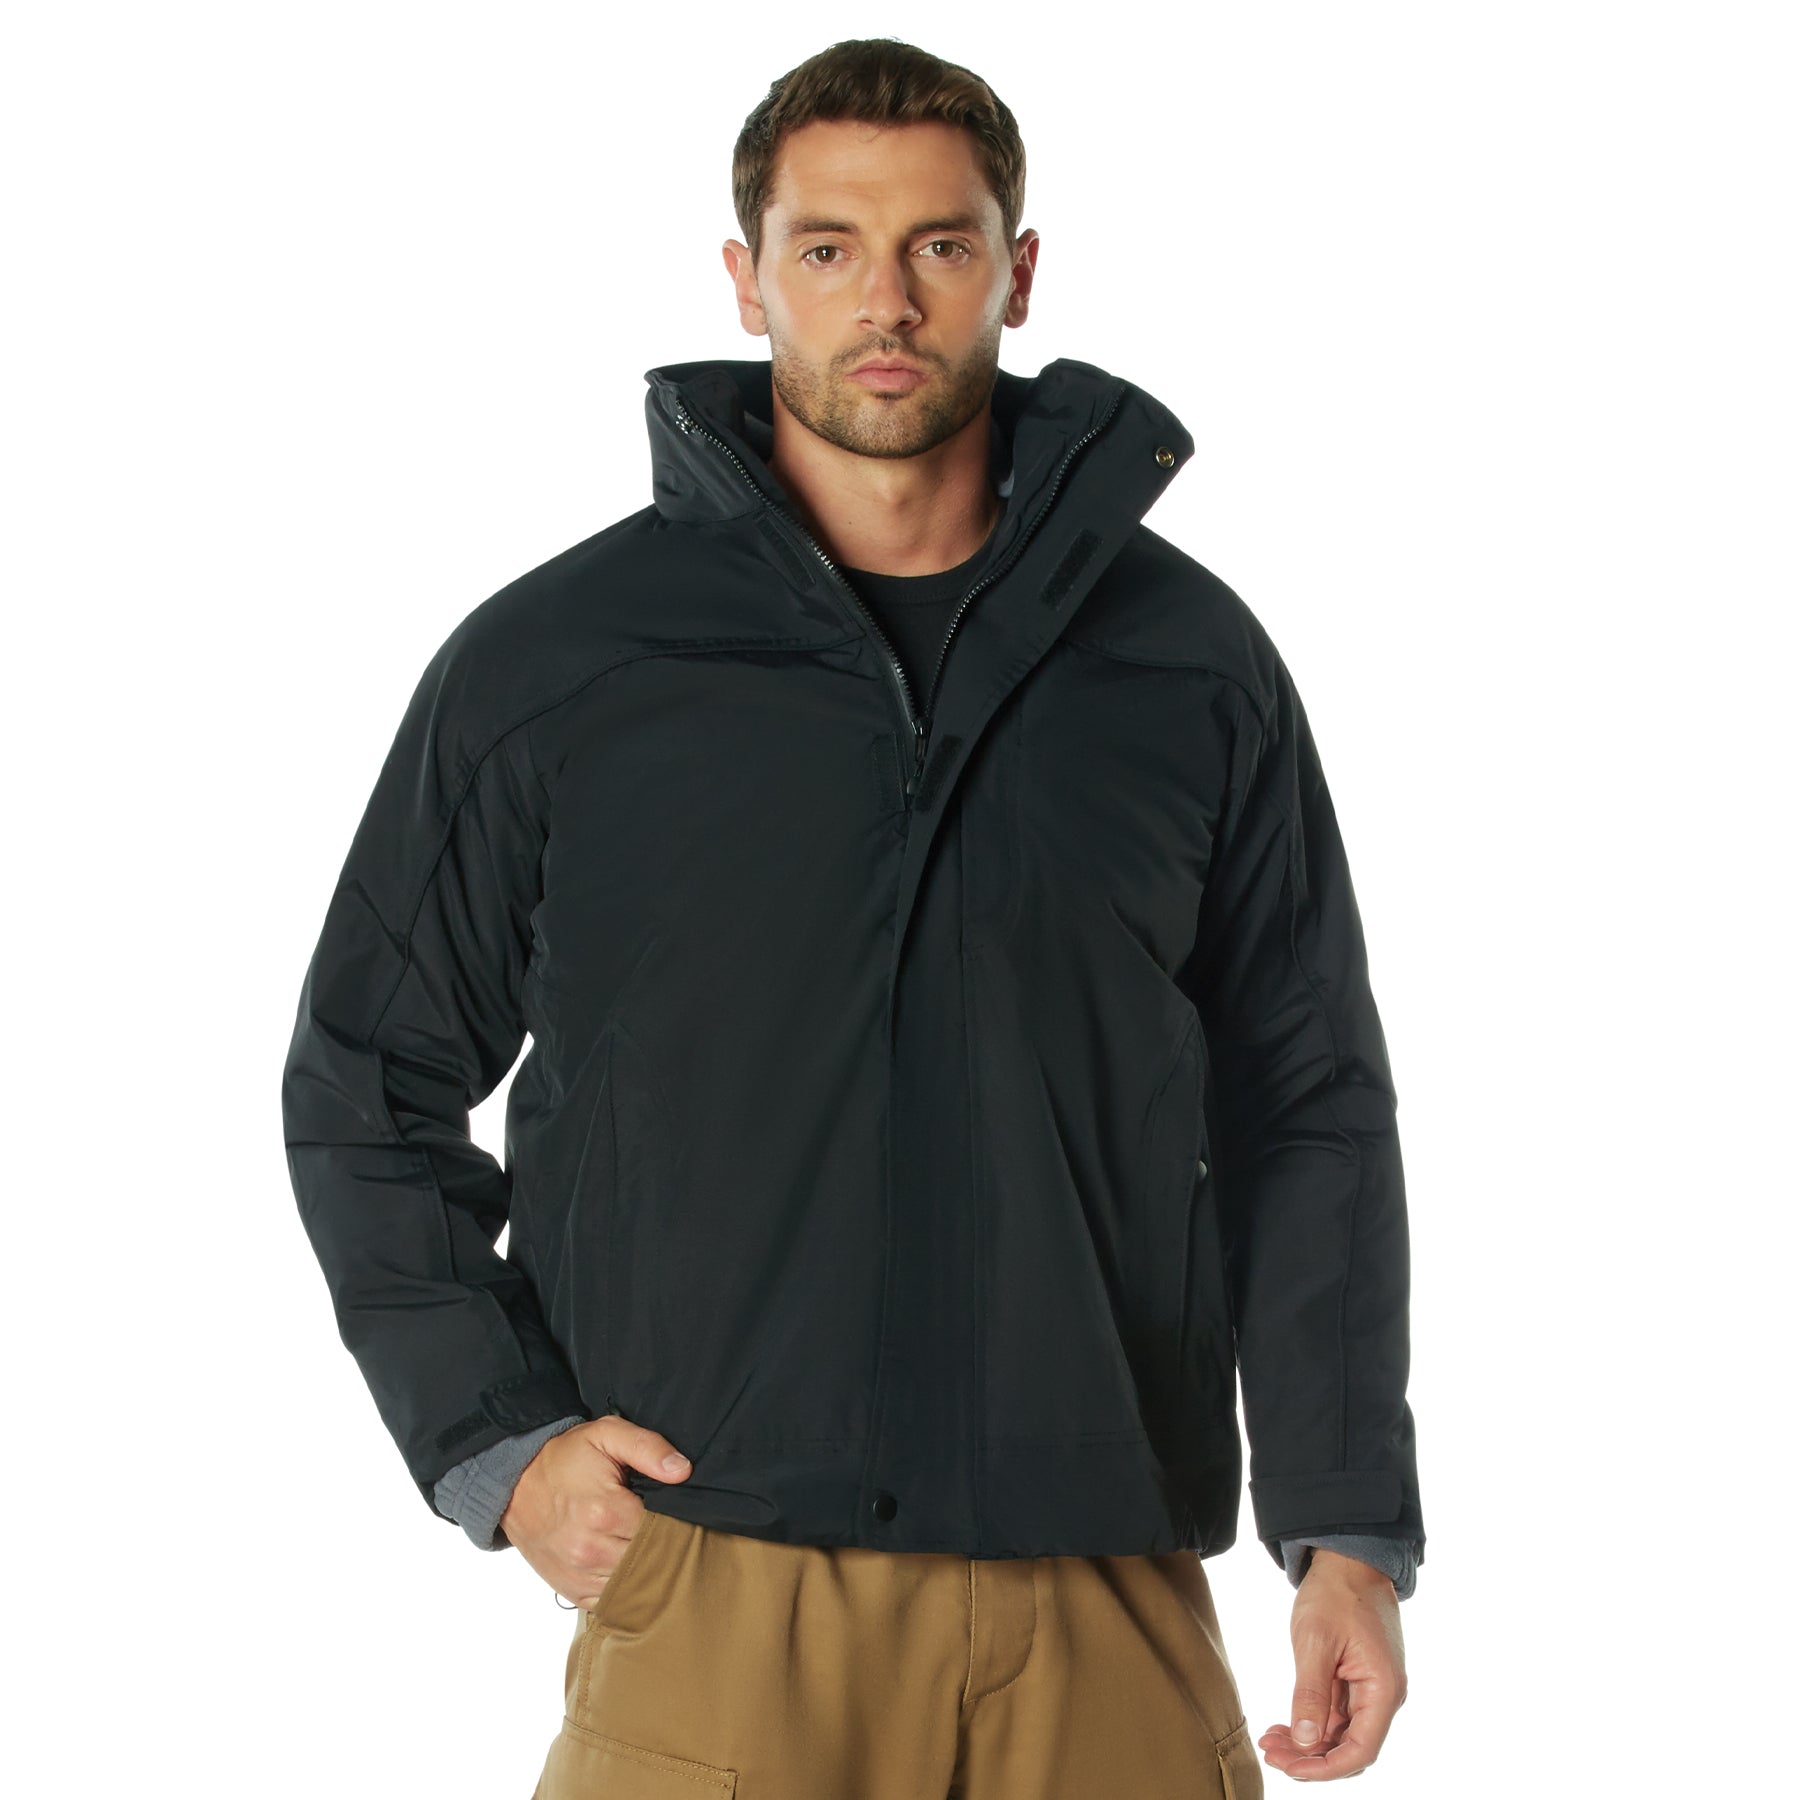 Nylon All Weather 3-In-1 Jackets